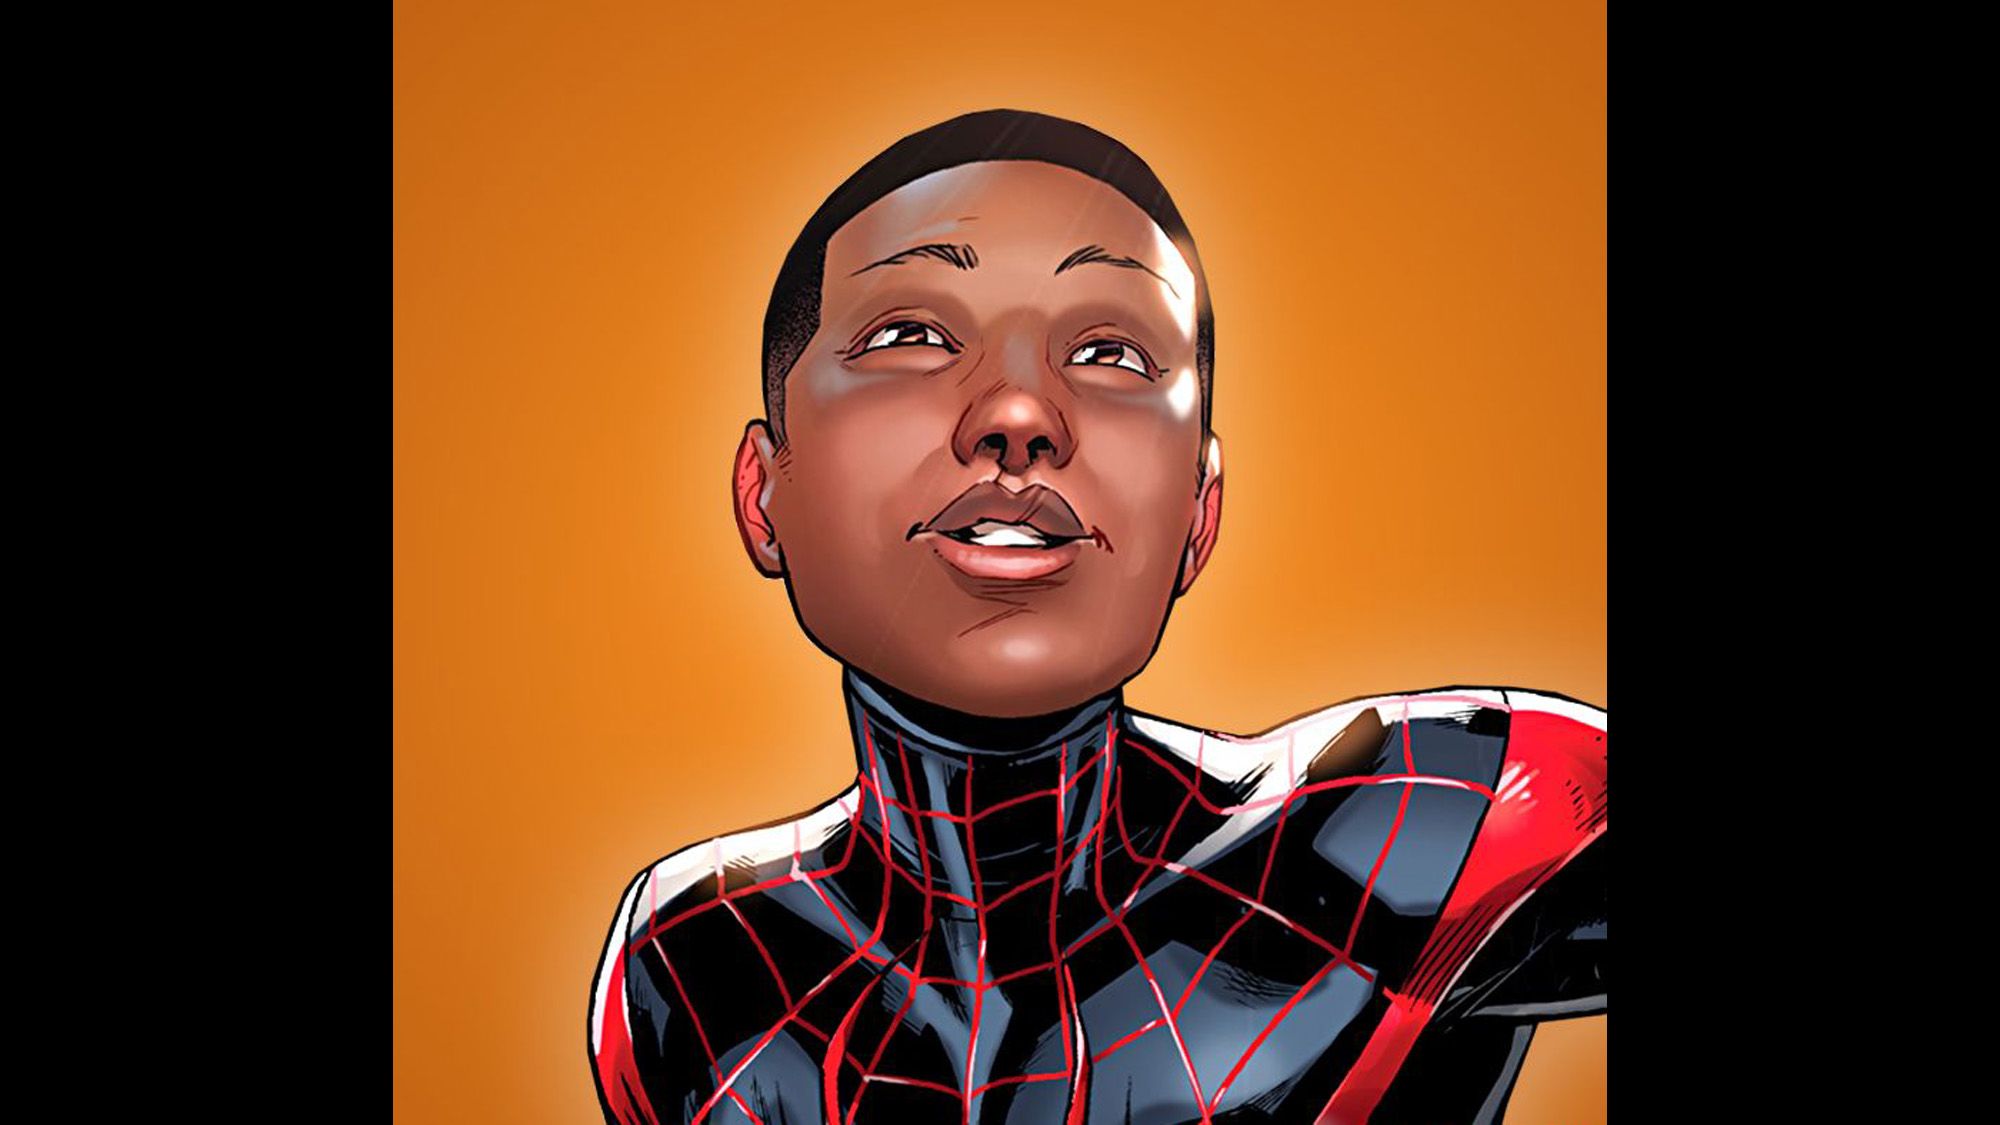 Miles Morales is the new Spider-Man, not Peter Parker